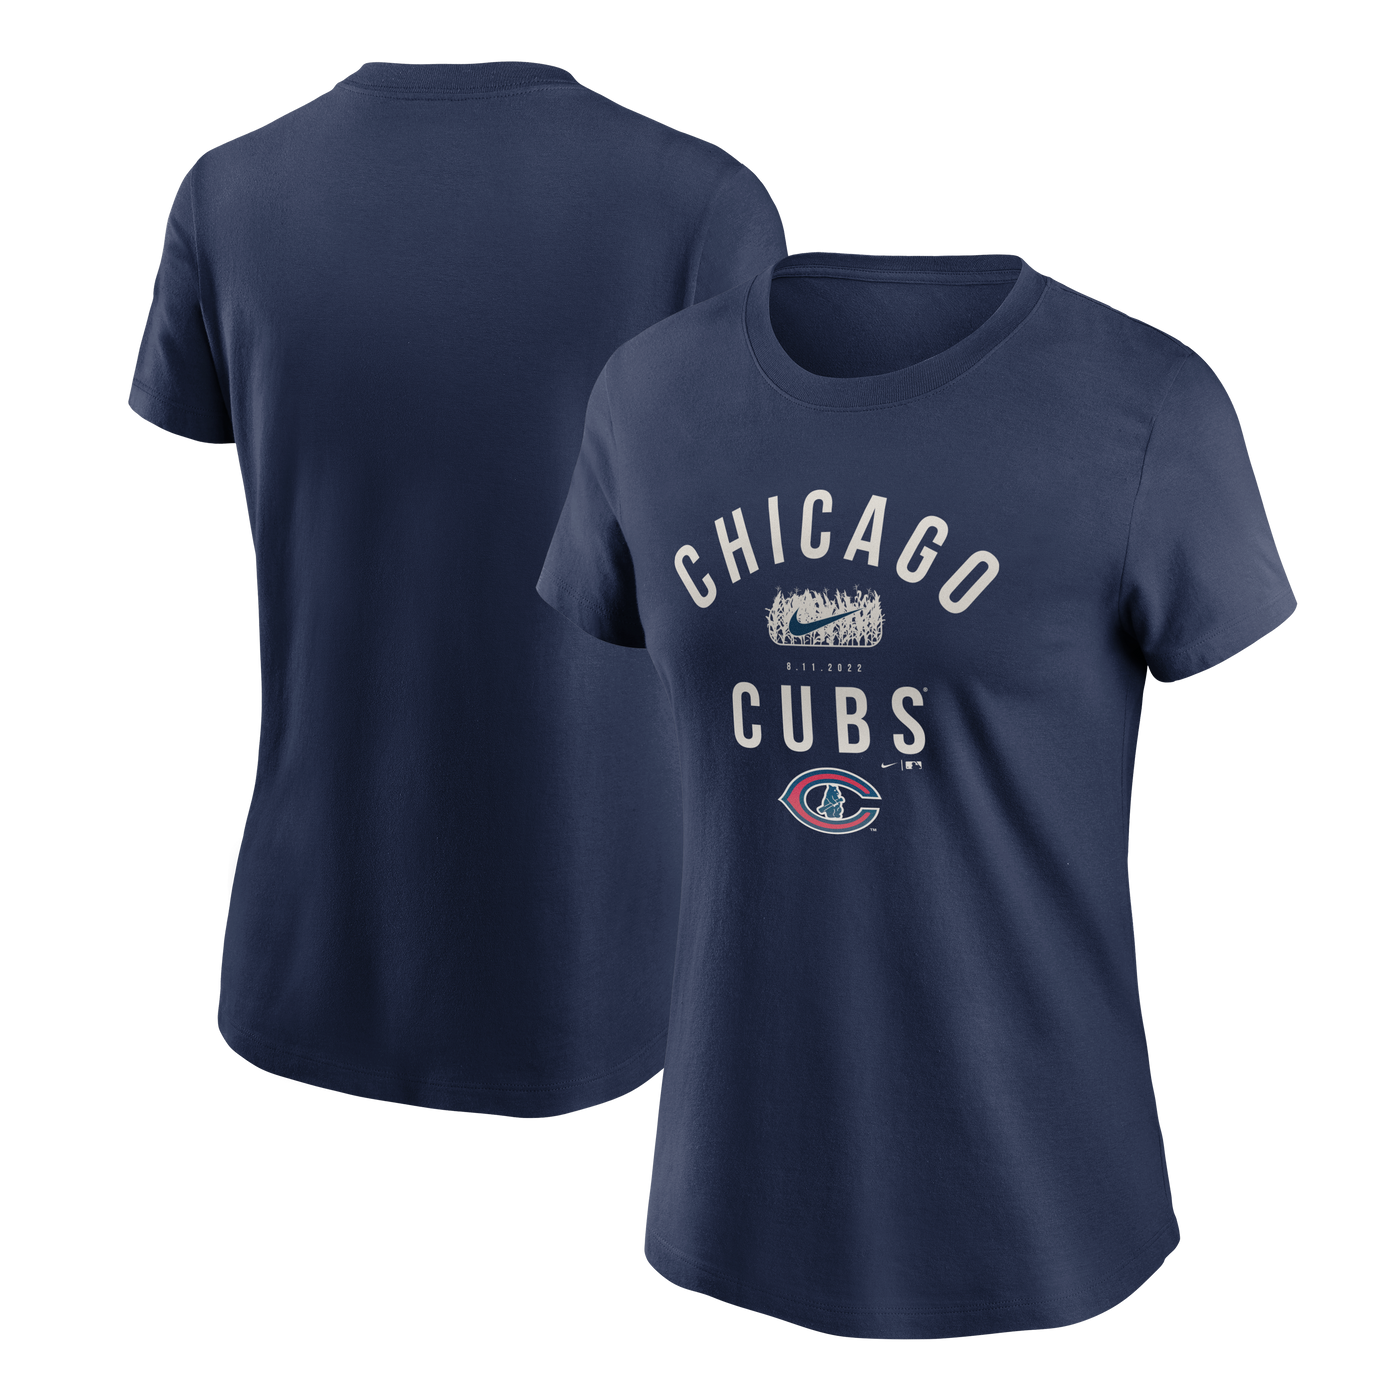 CHICAGO CUBS NIKE WOMEN'S FIELD OF DREAMS NAVY TEE